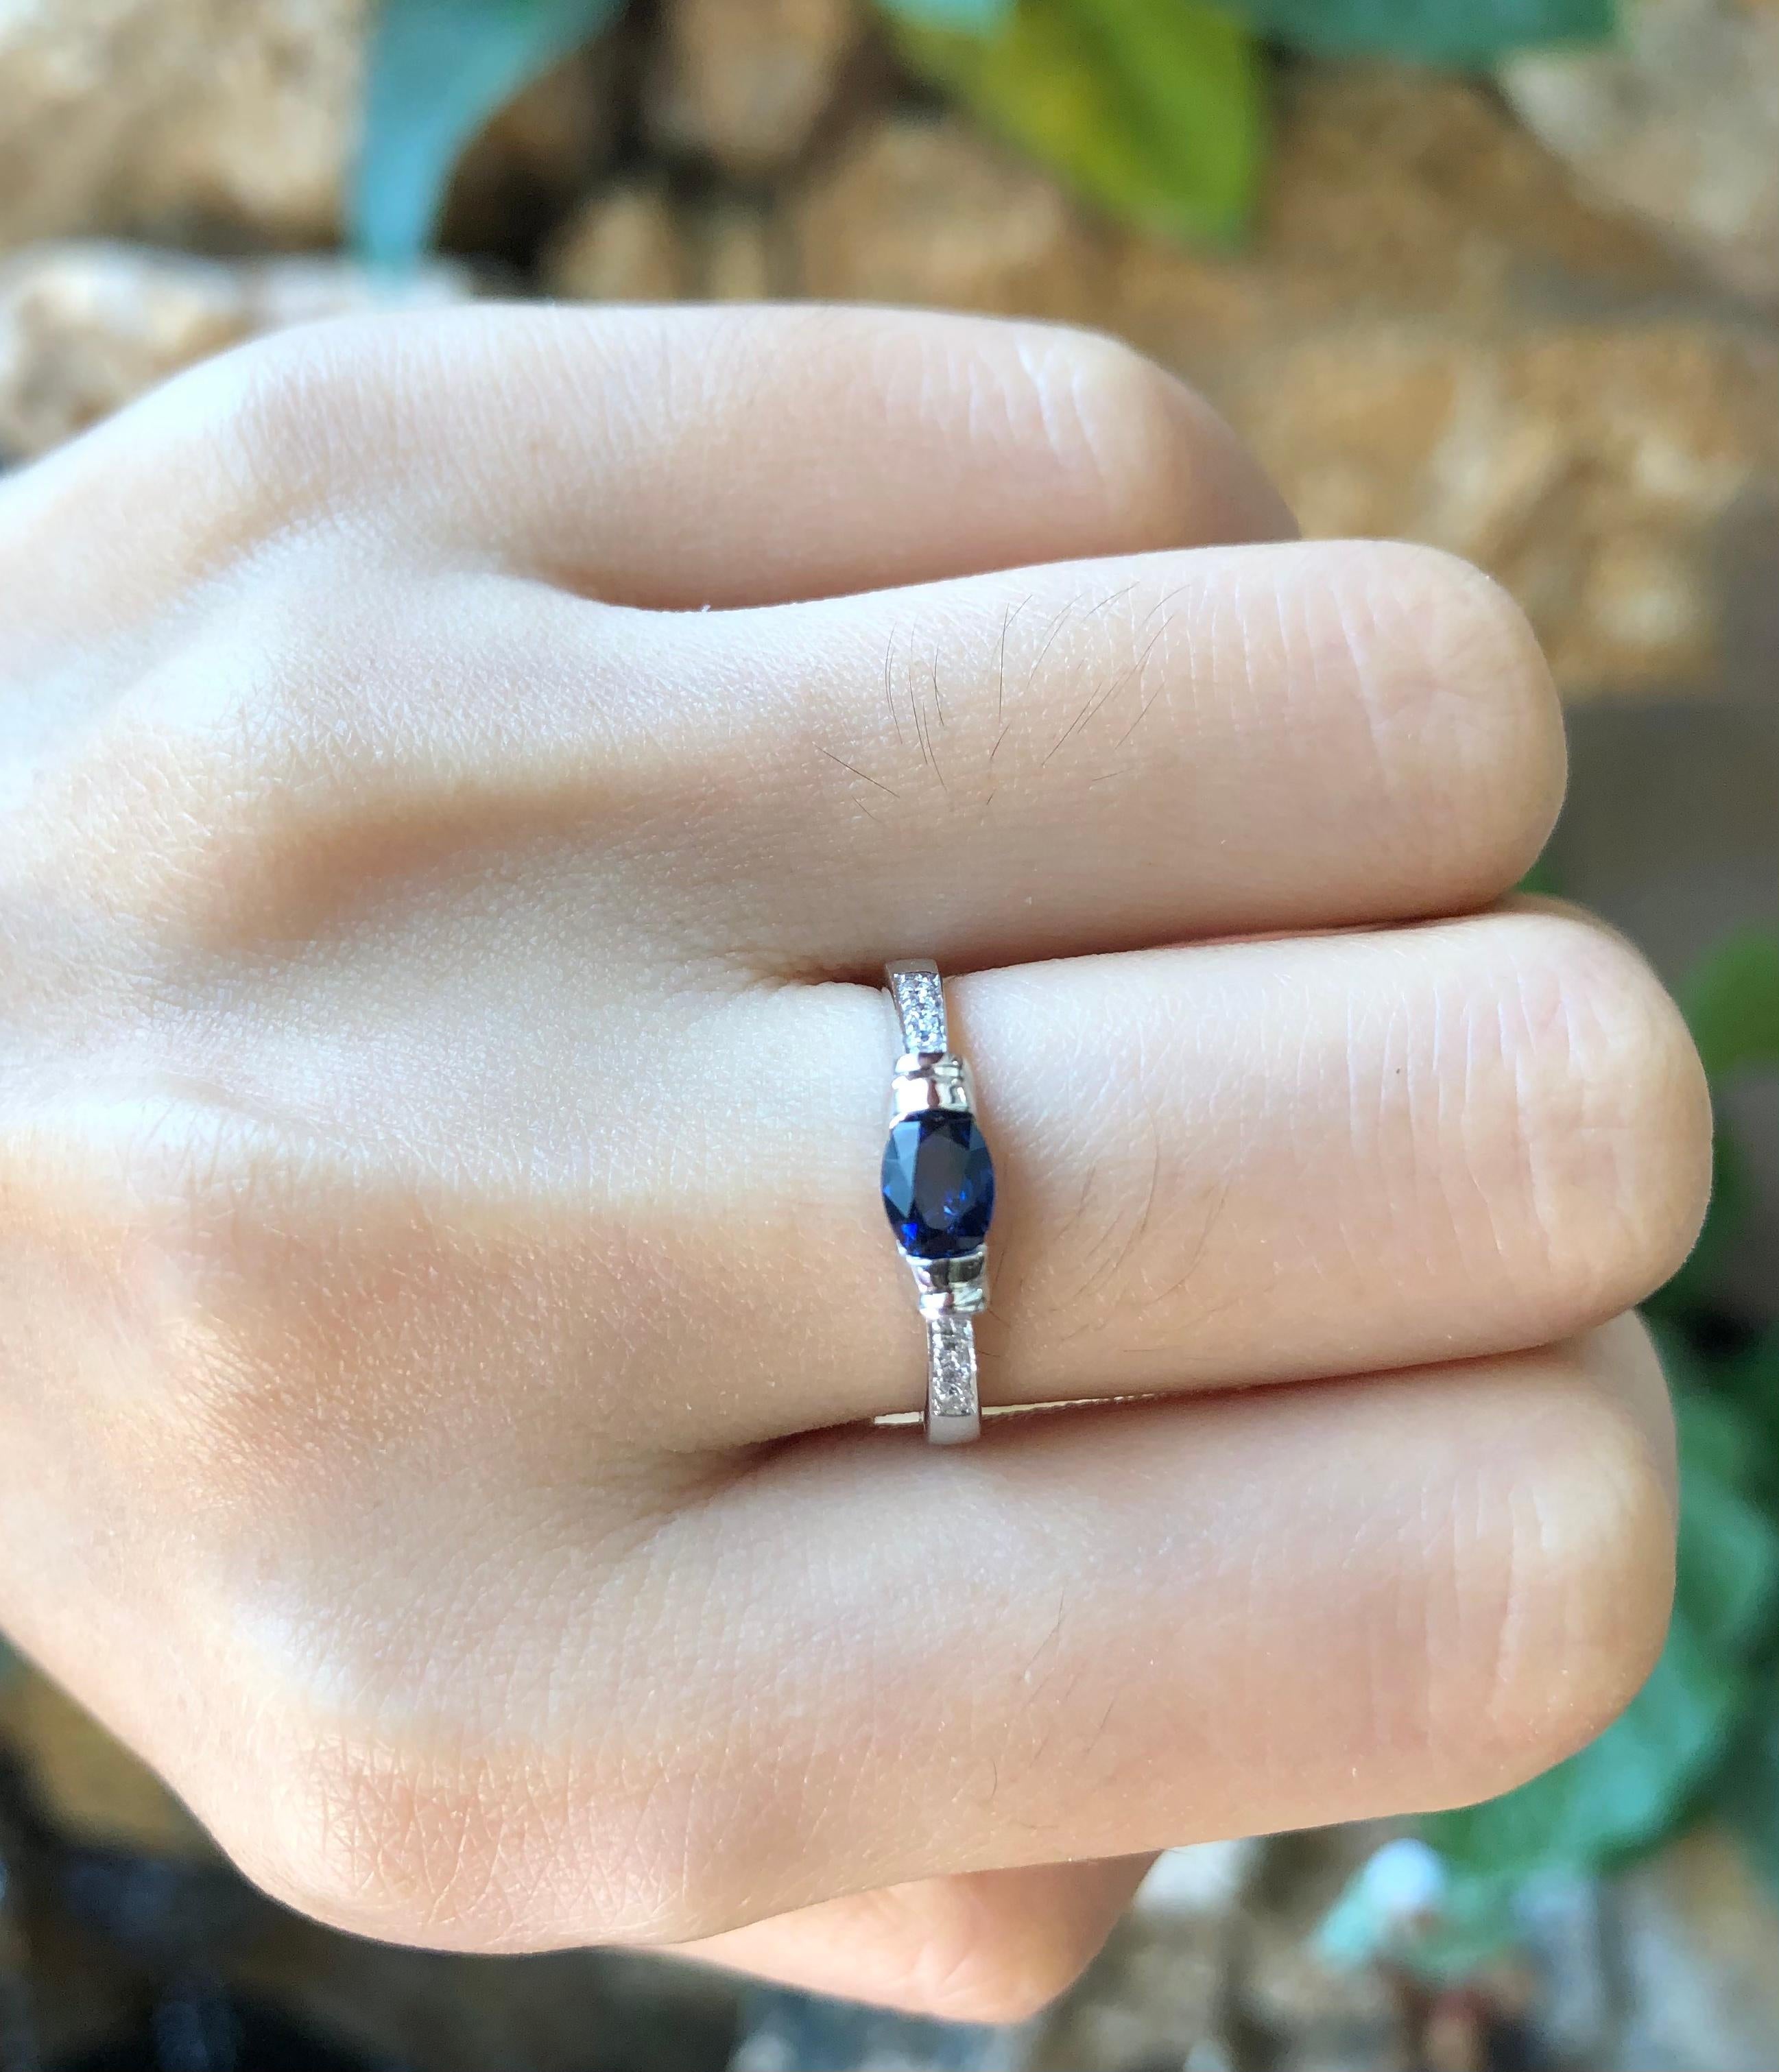 Oval Cut Blue Sapphire 0.52 Carat with Diamond 0.07 Carat Ring Set in 18 Karat White Gold For Sale